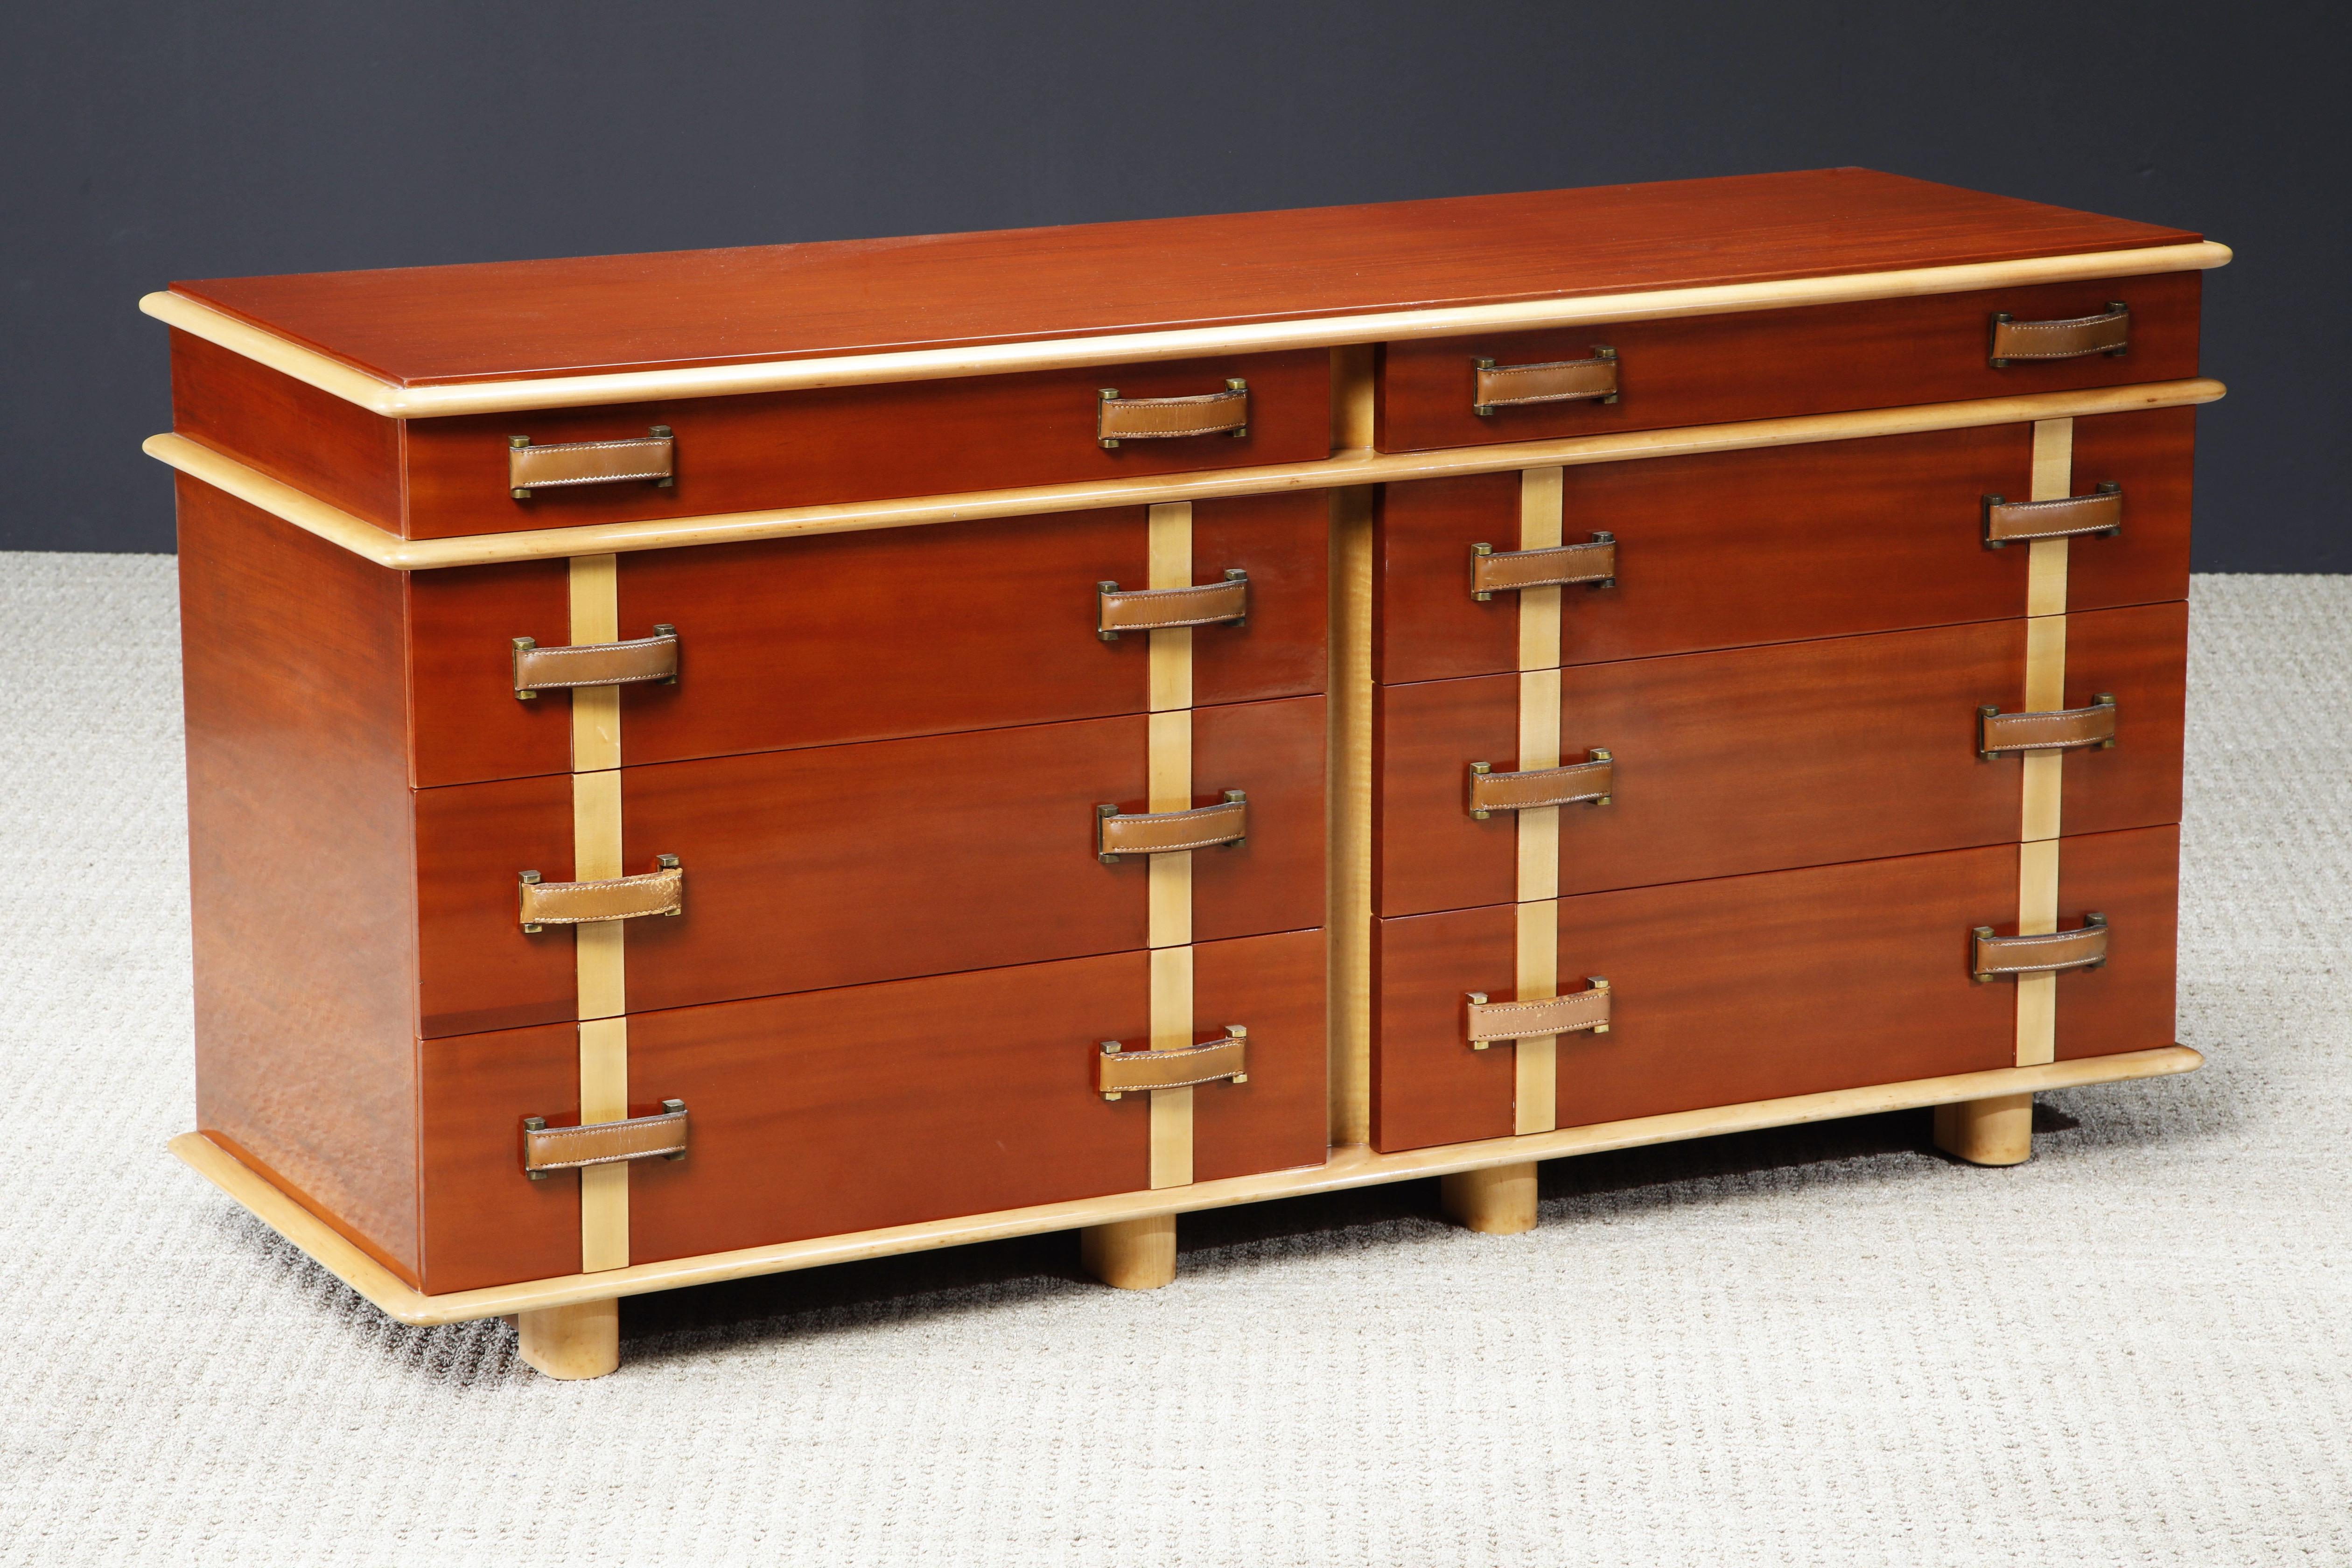 Mid-20th Century 'Station Wagon' Dresser by Paul Frankl for Johnson Furniture, c. 1945, Signed